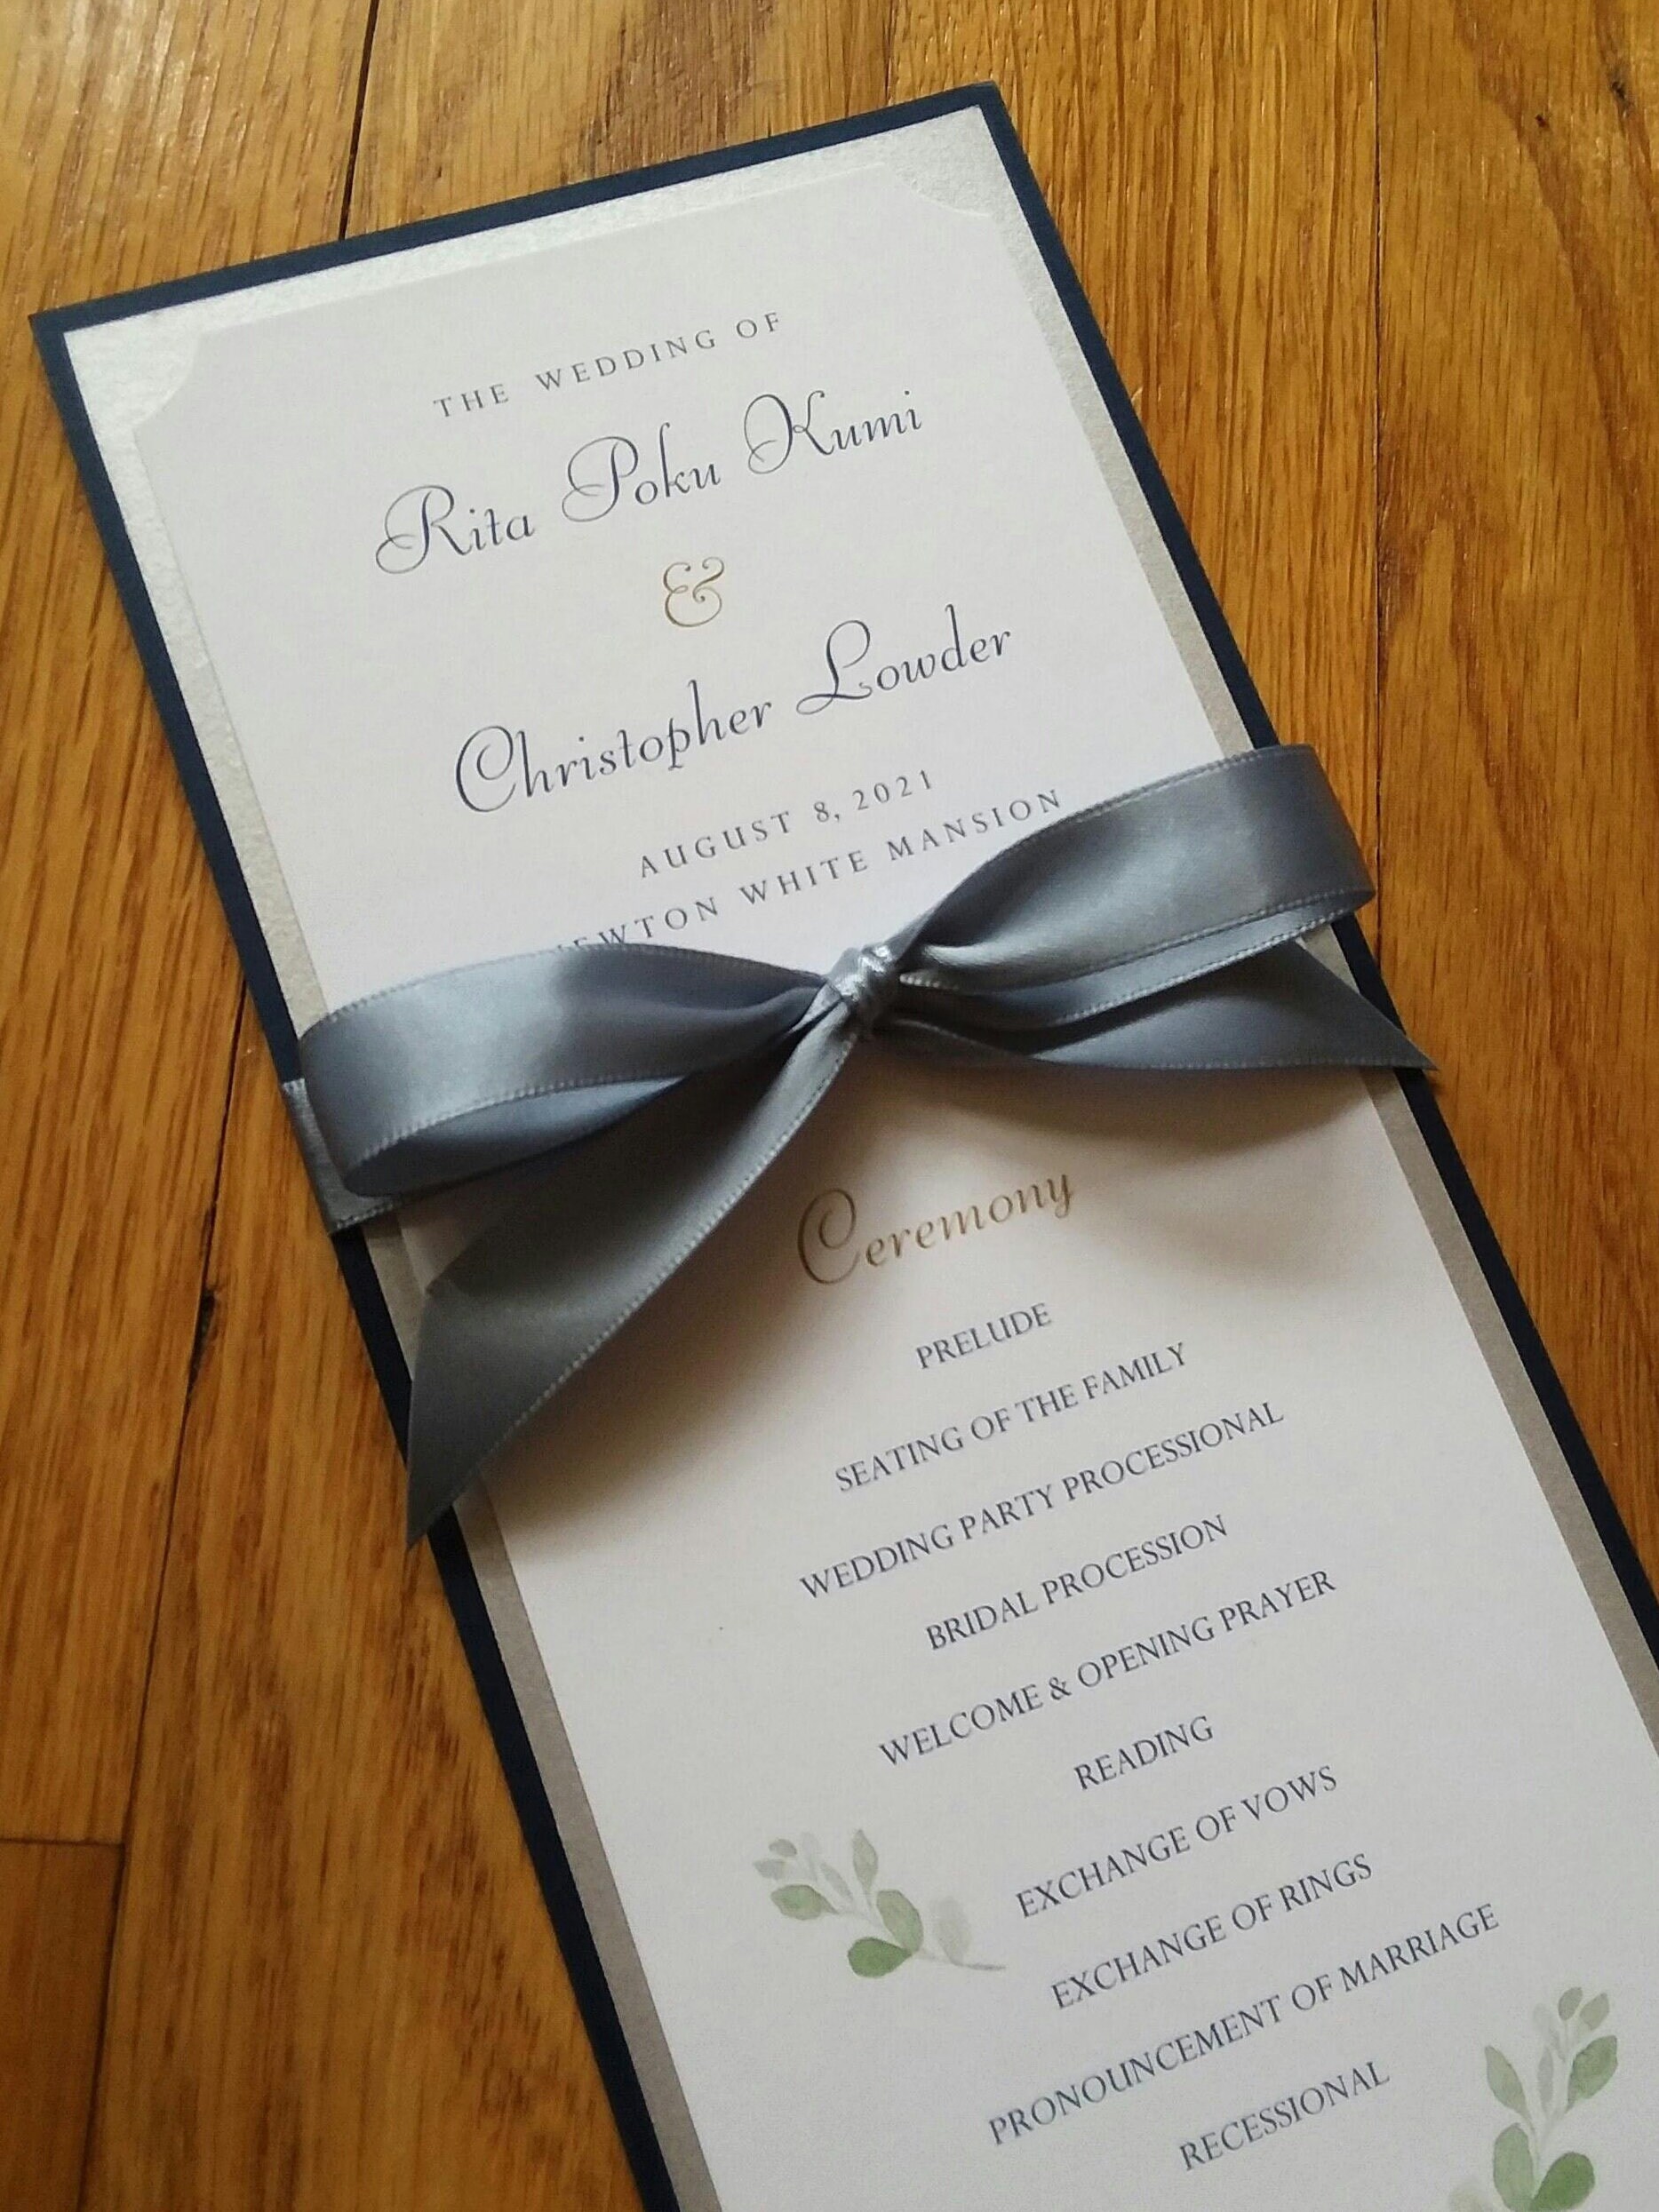 Hitch Studio offers ribbon for your wedding invitations!